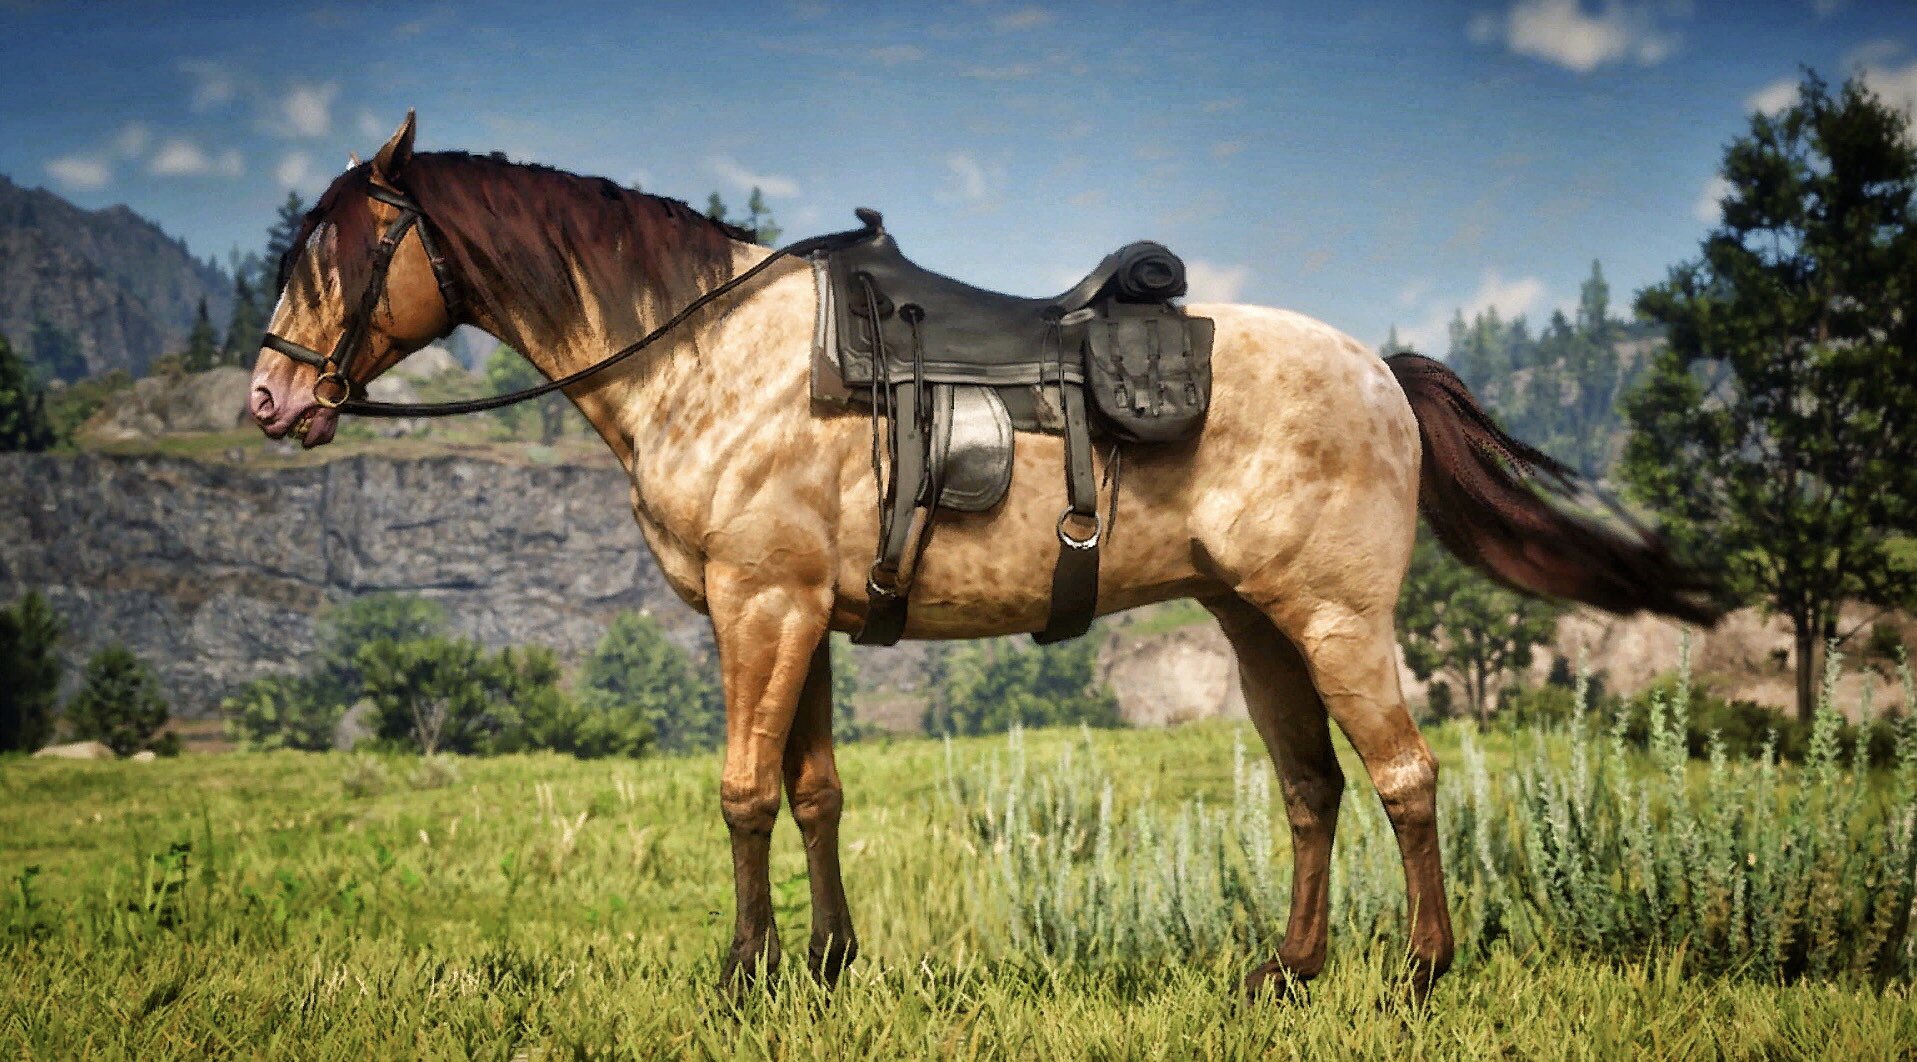 cabriolet afsked Tryk ned FiveTheGamer on Twitter: "Finally got it! My newest horse in #RDR2 online.  He's an amber champagne colored Missouri Fox Trotter named Yoda  #RedDeadOnline #xbox https://t.co/oNnPLQRJ1a" / Twitter